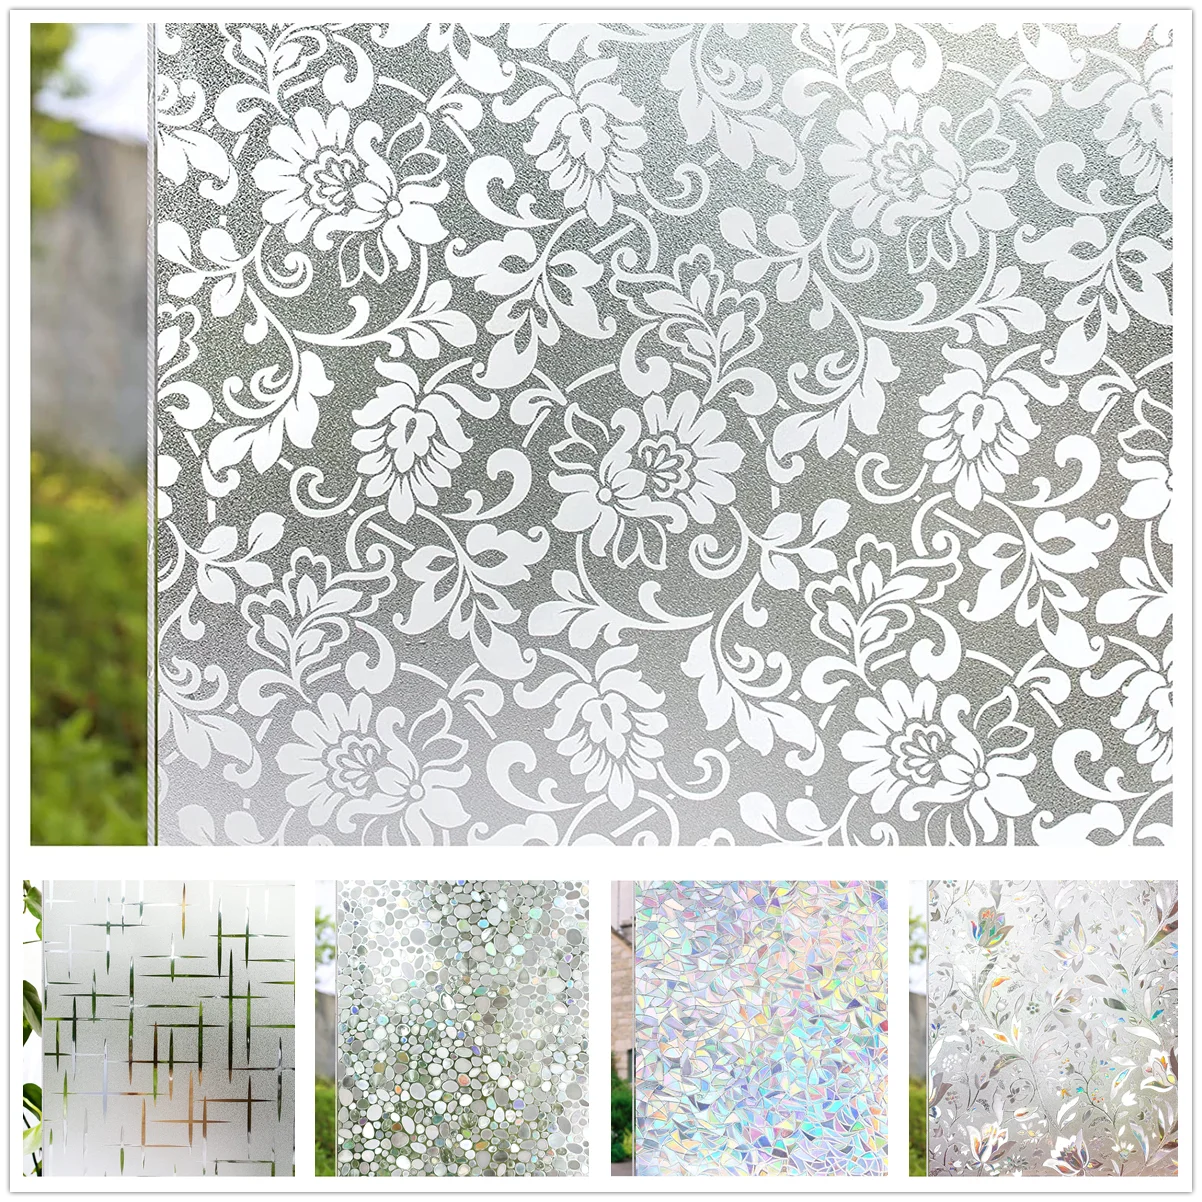 

Matte Decorative Window Privacy Film Static Cling Stained Adhesive Glass Vinyl for Home Frosted UV Blocking Heat Control Sticker